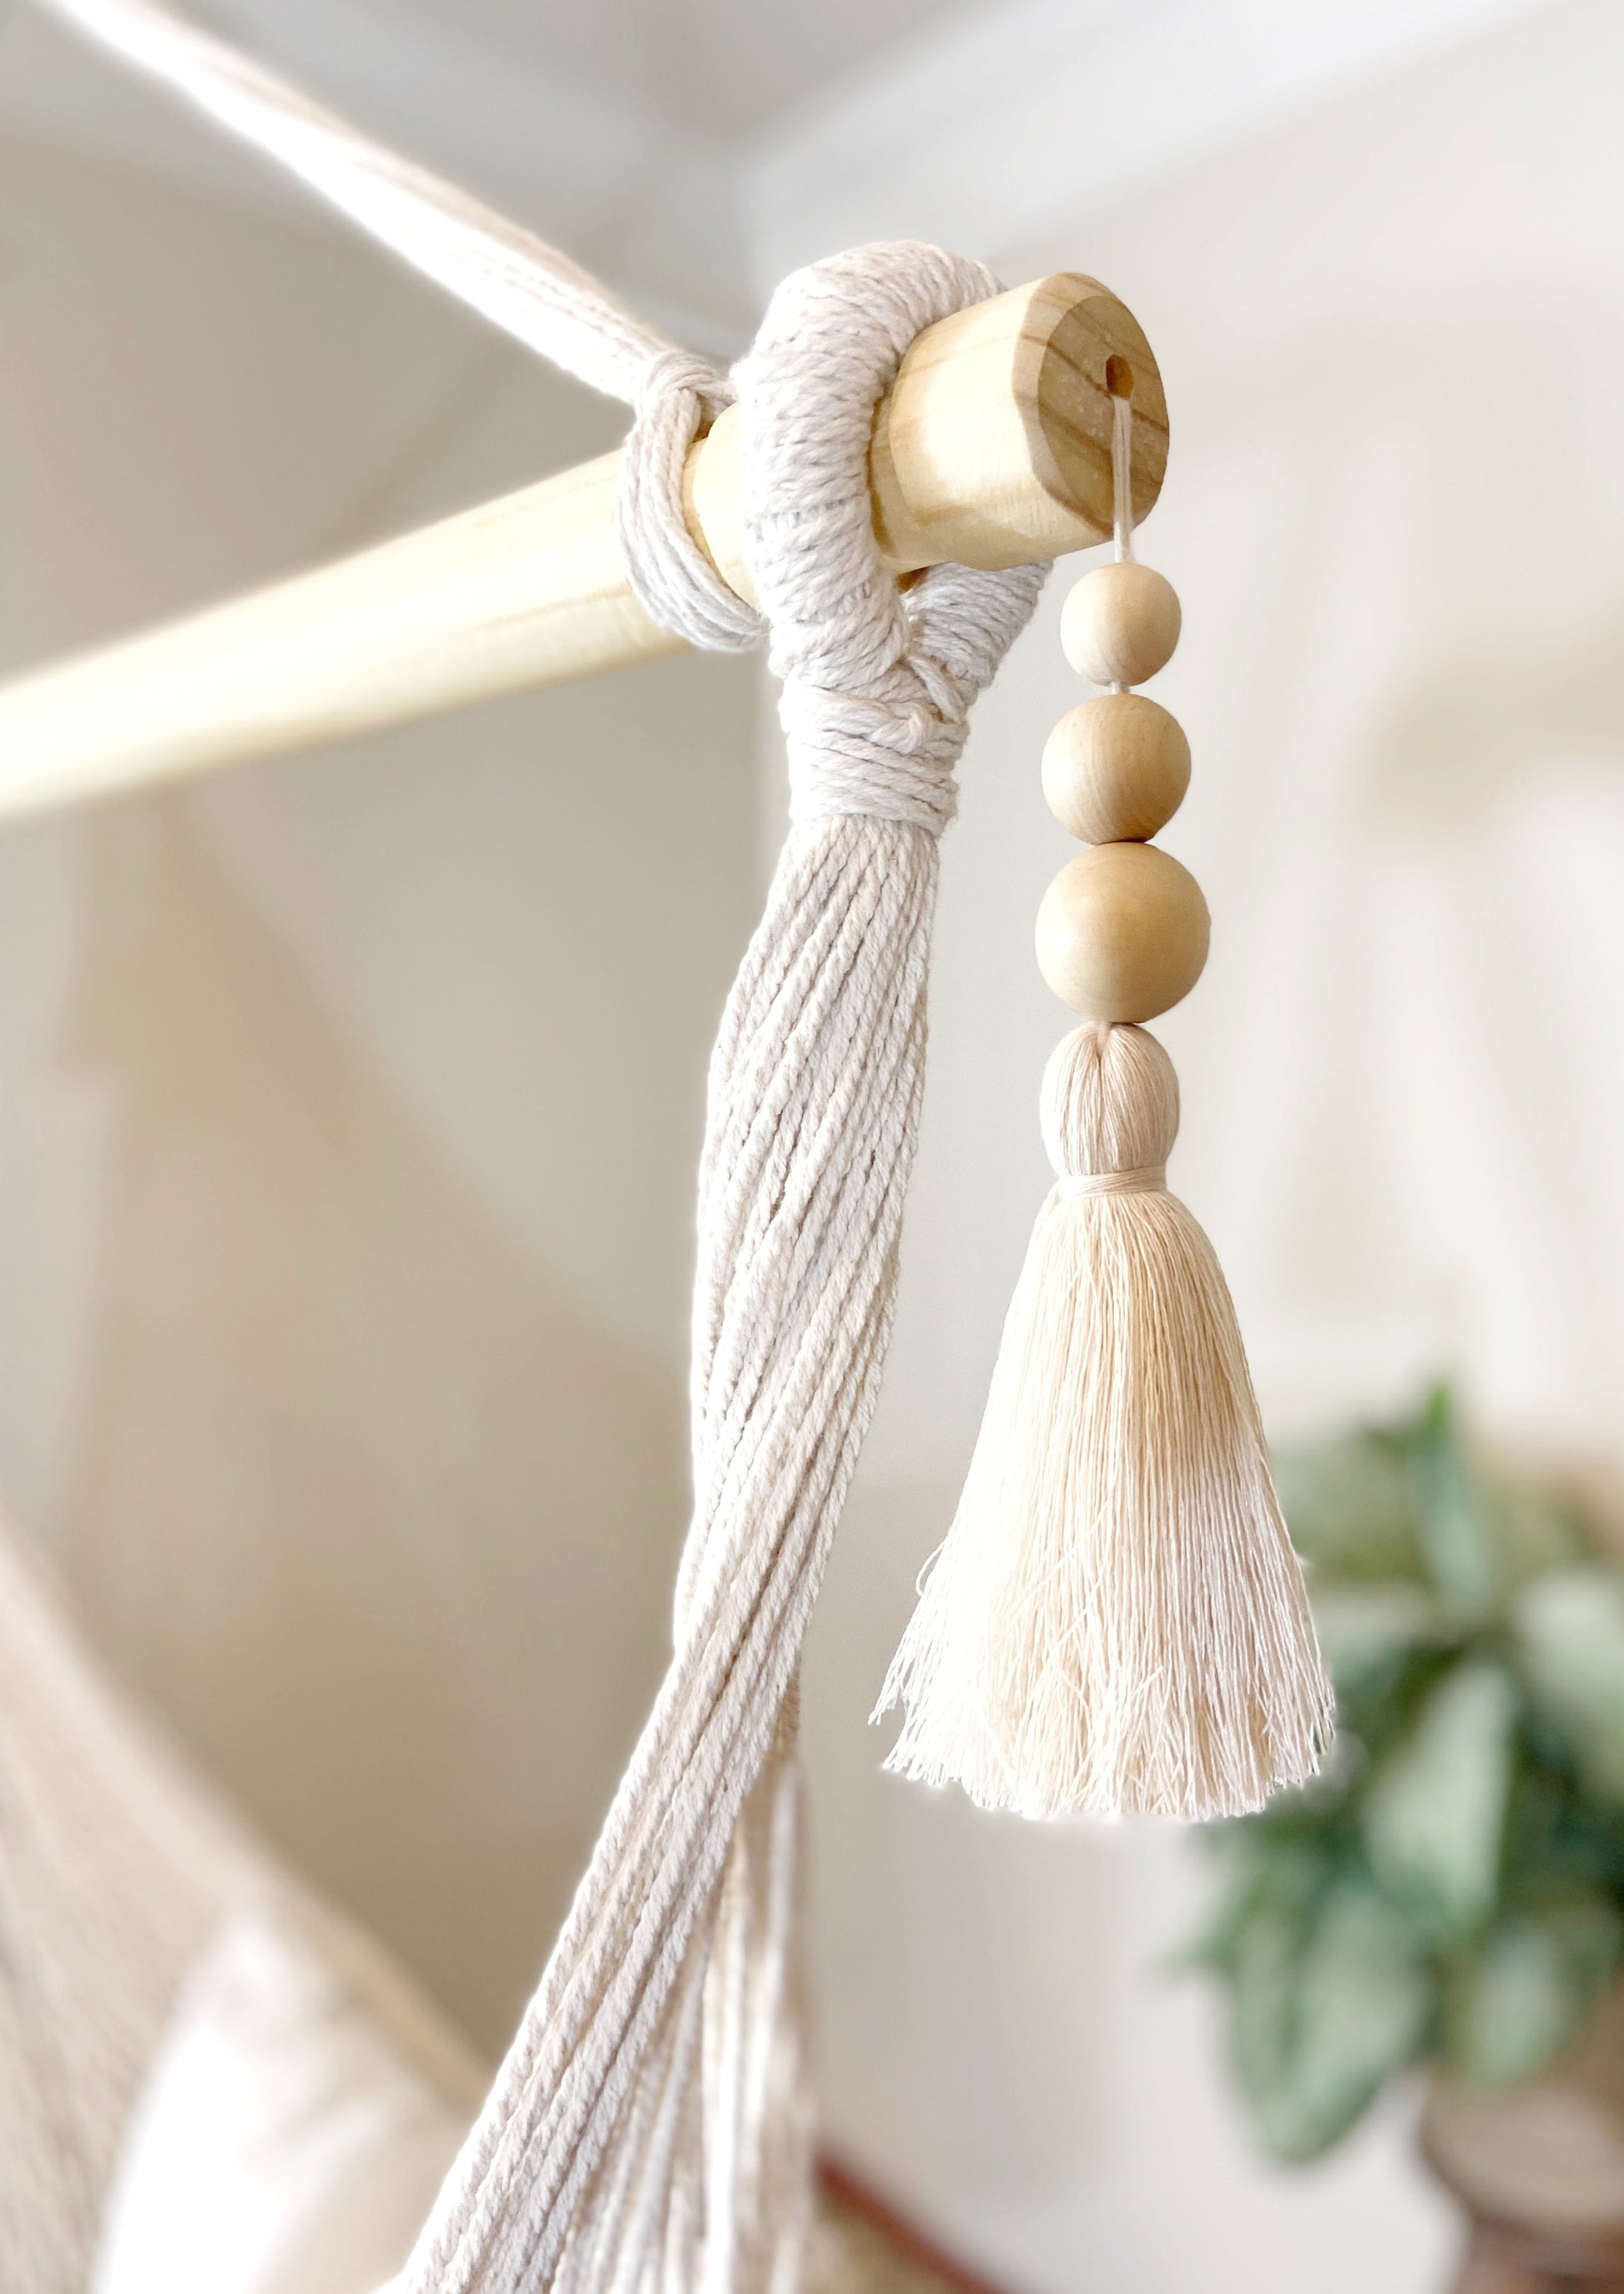 tassels on a woven macrame hanging chair